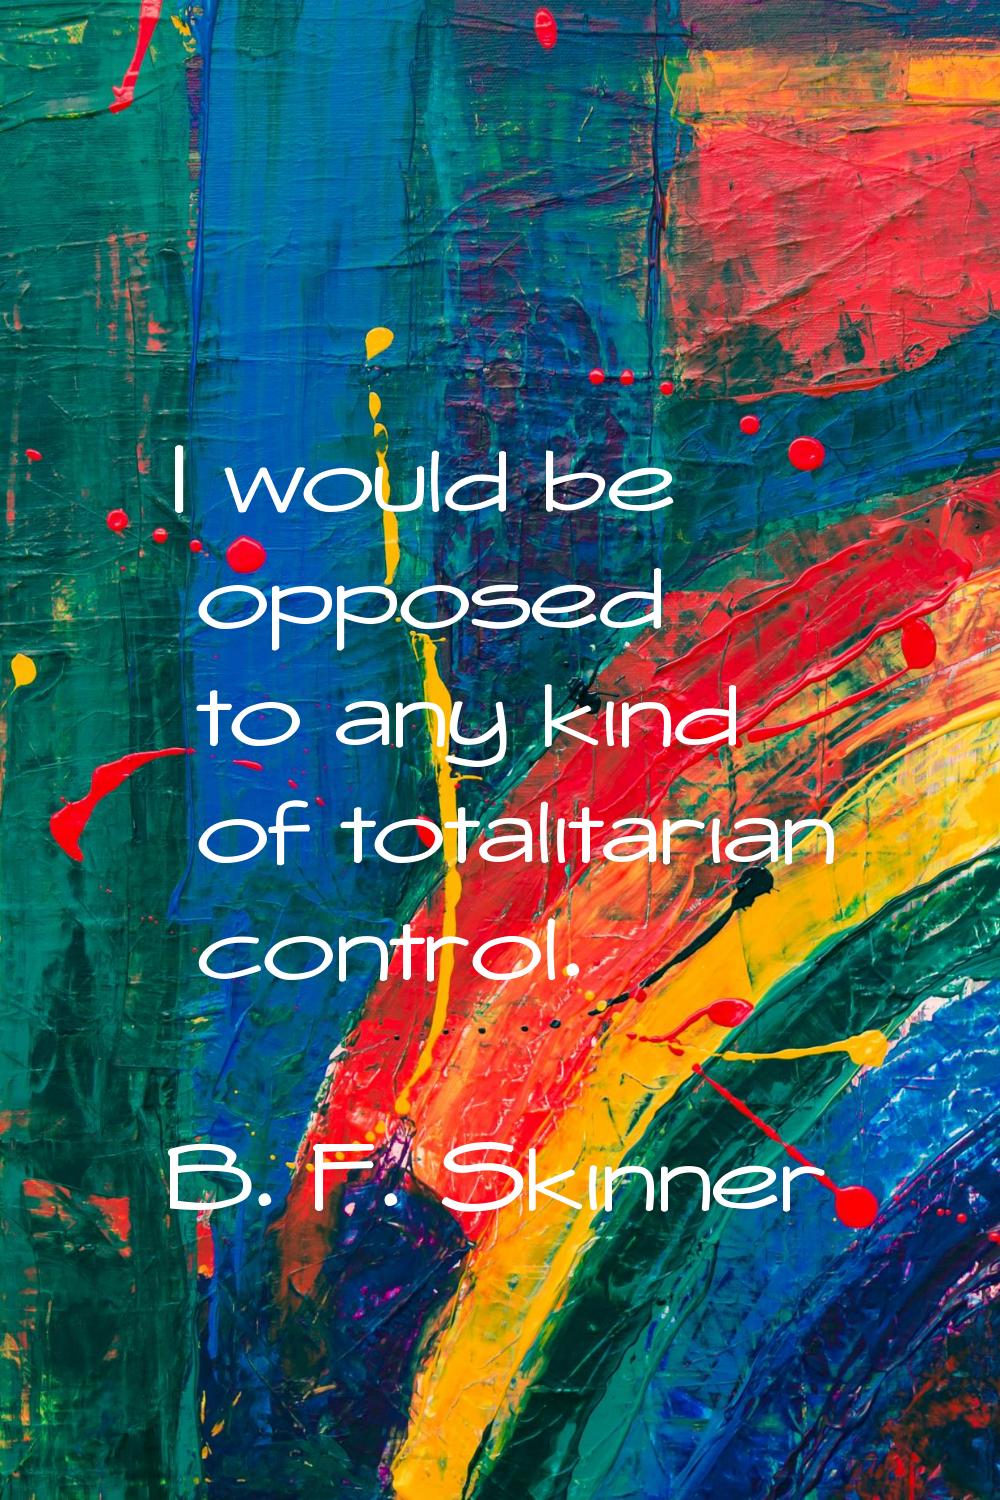 I would be opposed to any kind of totalitarian control.